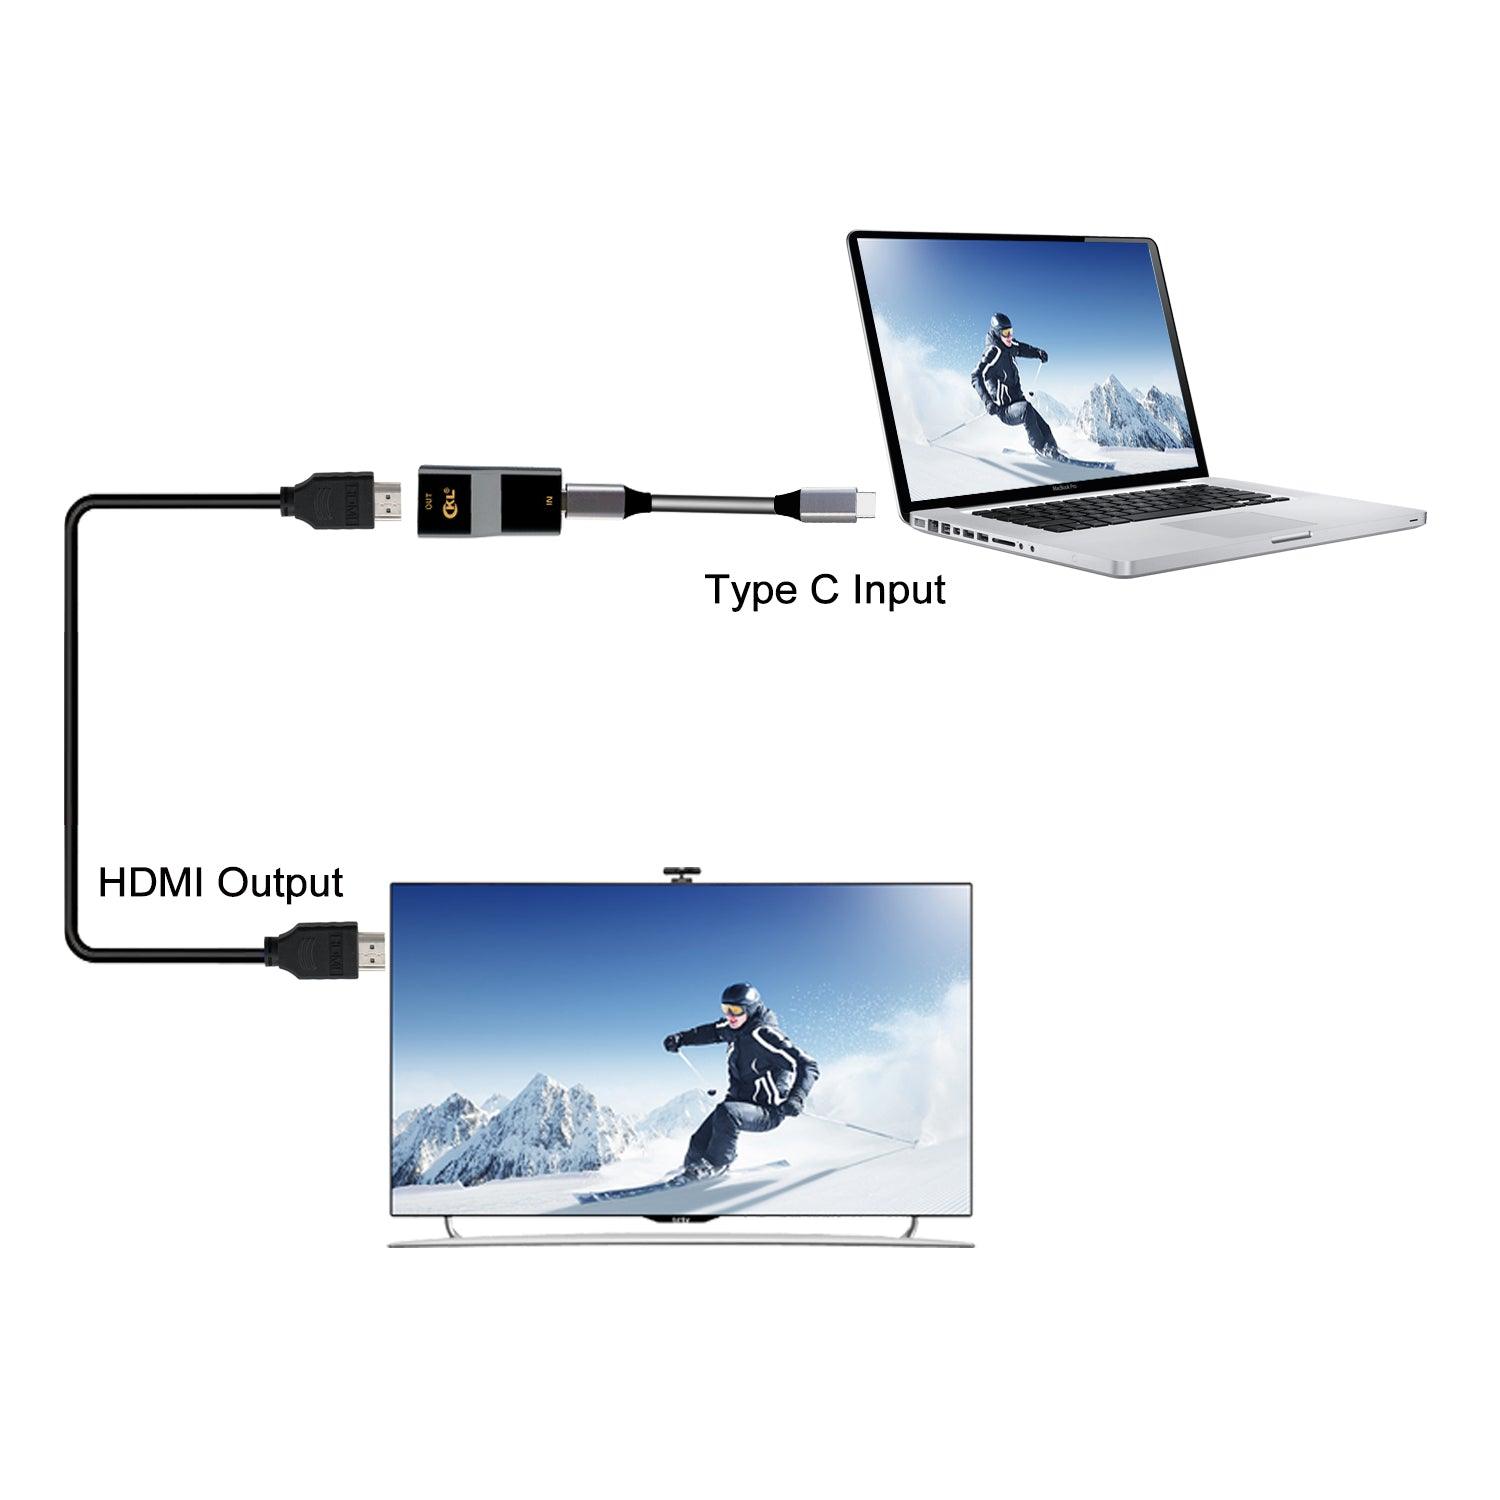 CKL 4Kx2K@60Hz USB-C to HDMI Adapter, Type-C to HDMI Converter Cable Compatible Thunderbolt 3 for CKL KVM Switch, Galaxy, Surface Pro, XPS, iPad, MacBook and More - CKL KVM Switches